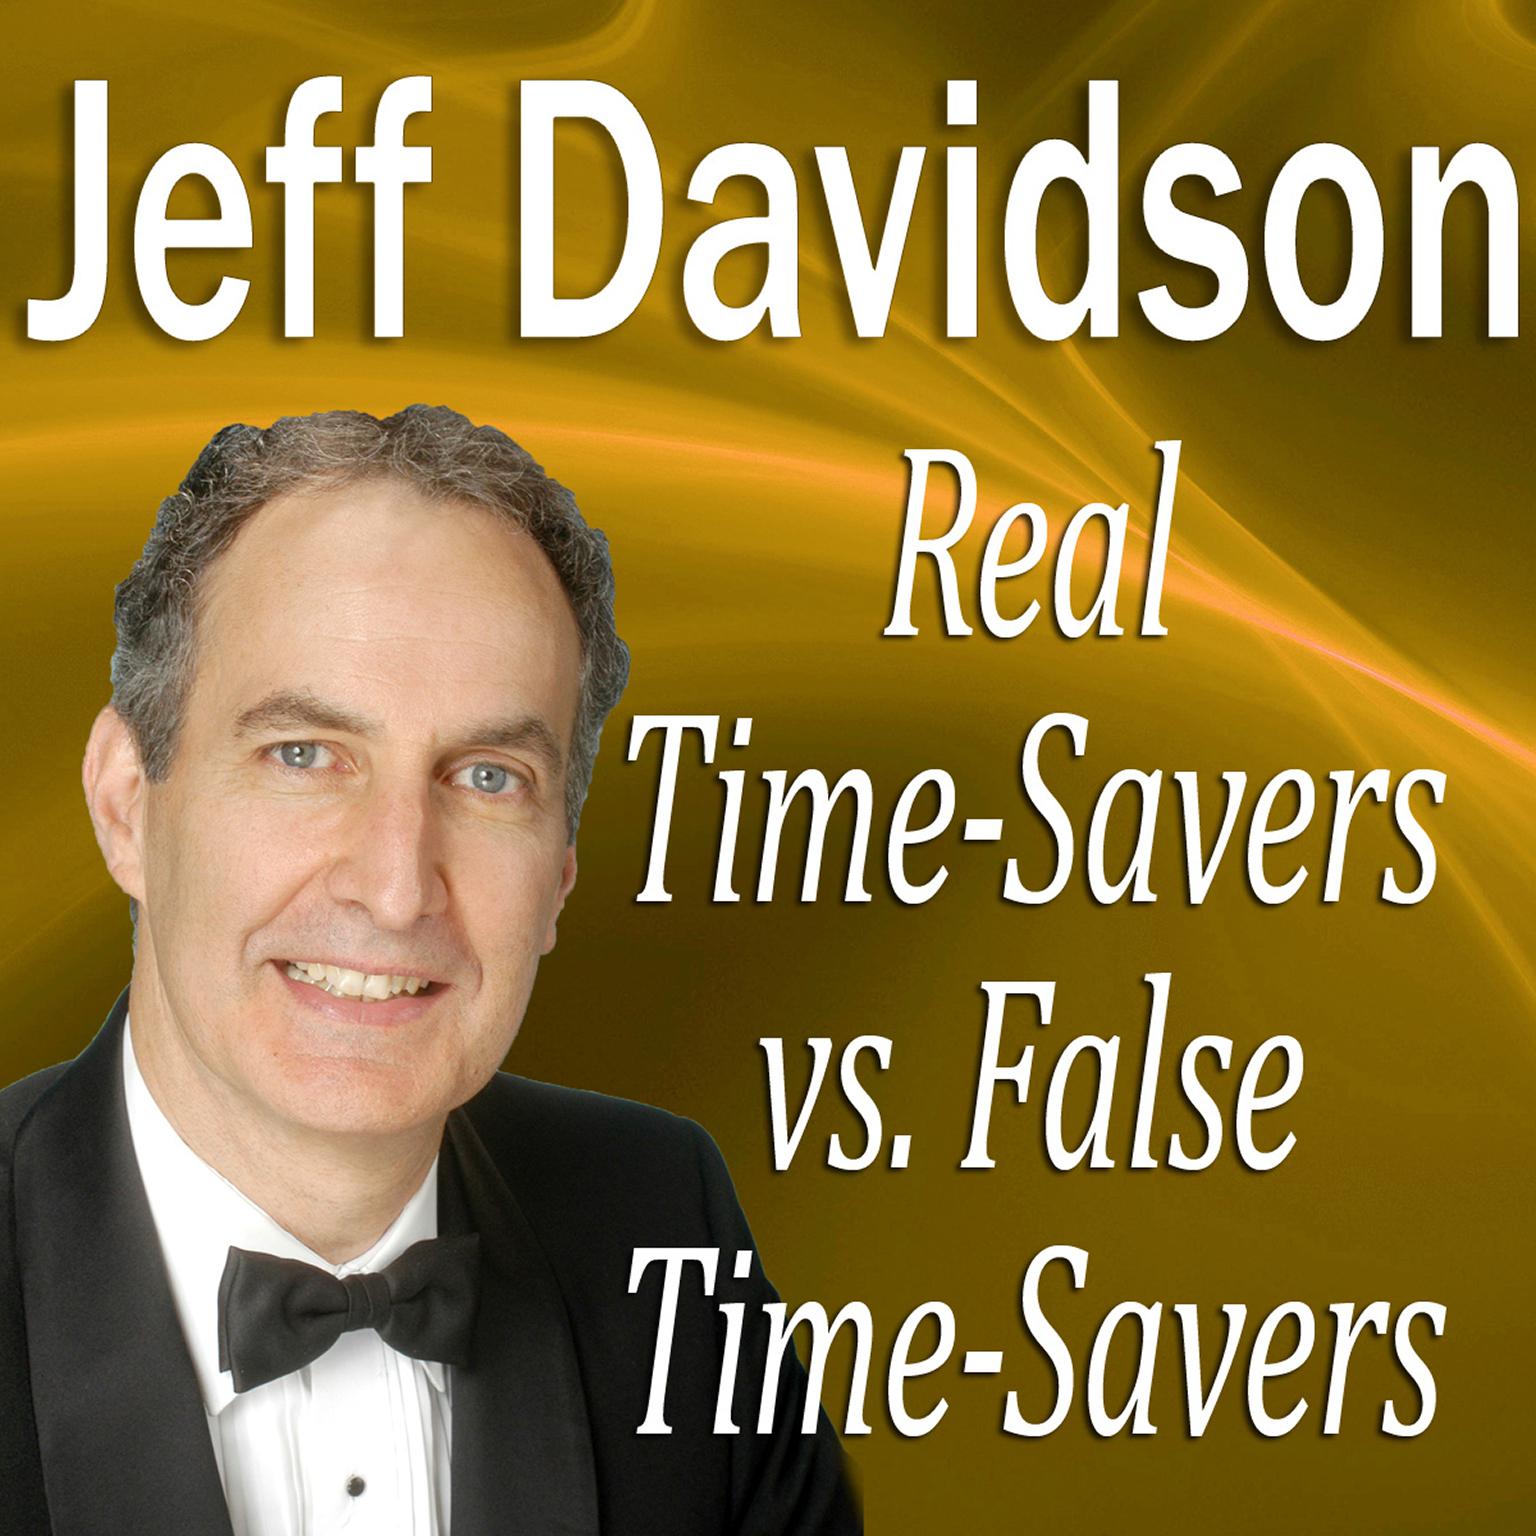 Real Time-Savers vs. False Time-Savers Audiobook, by Made for Success